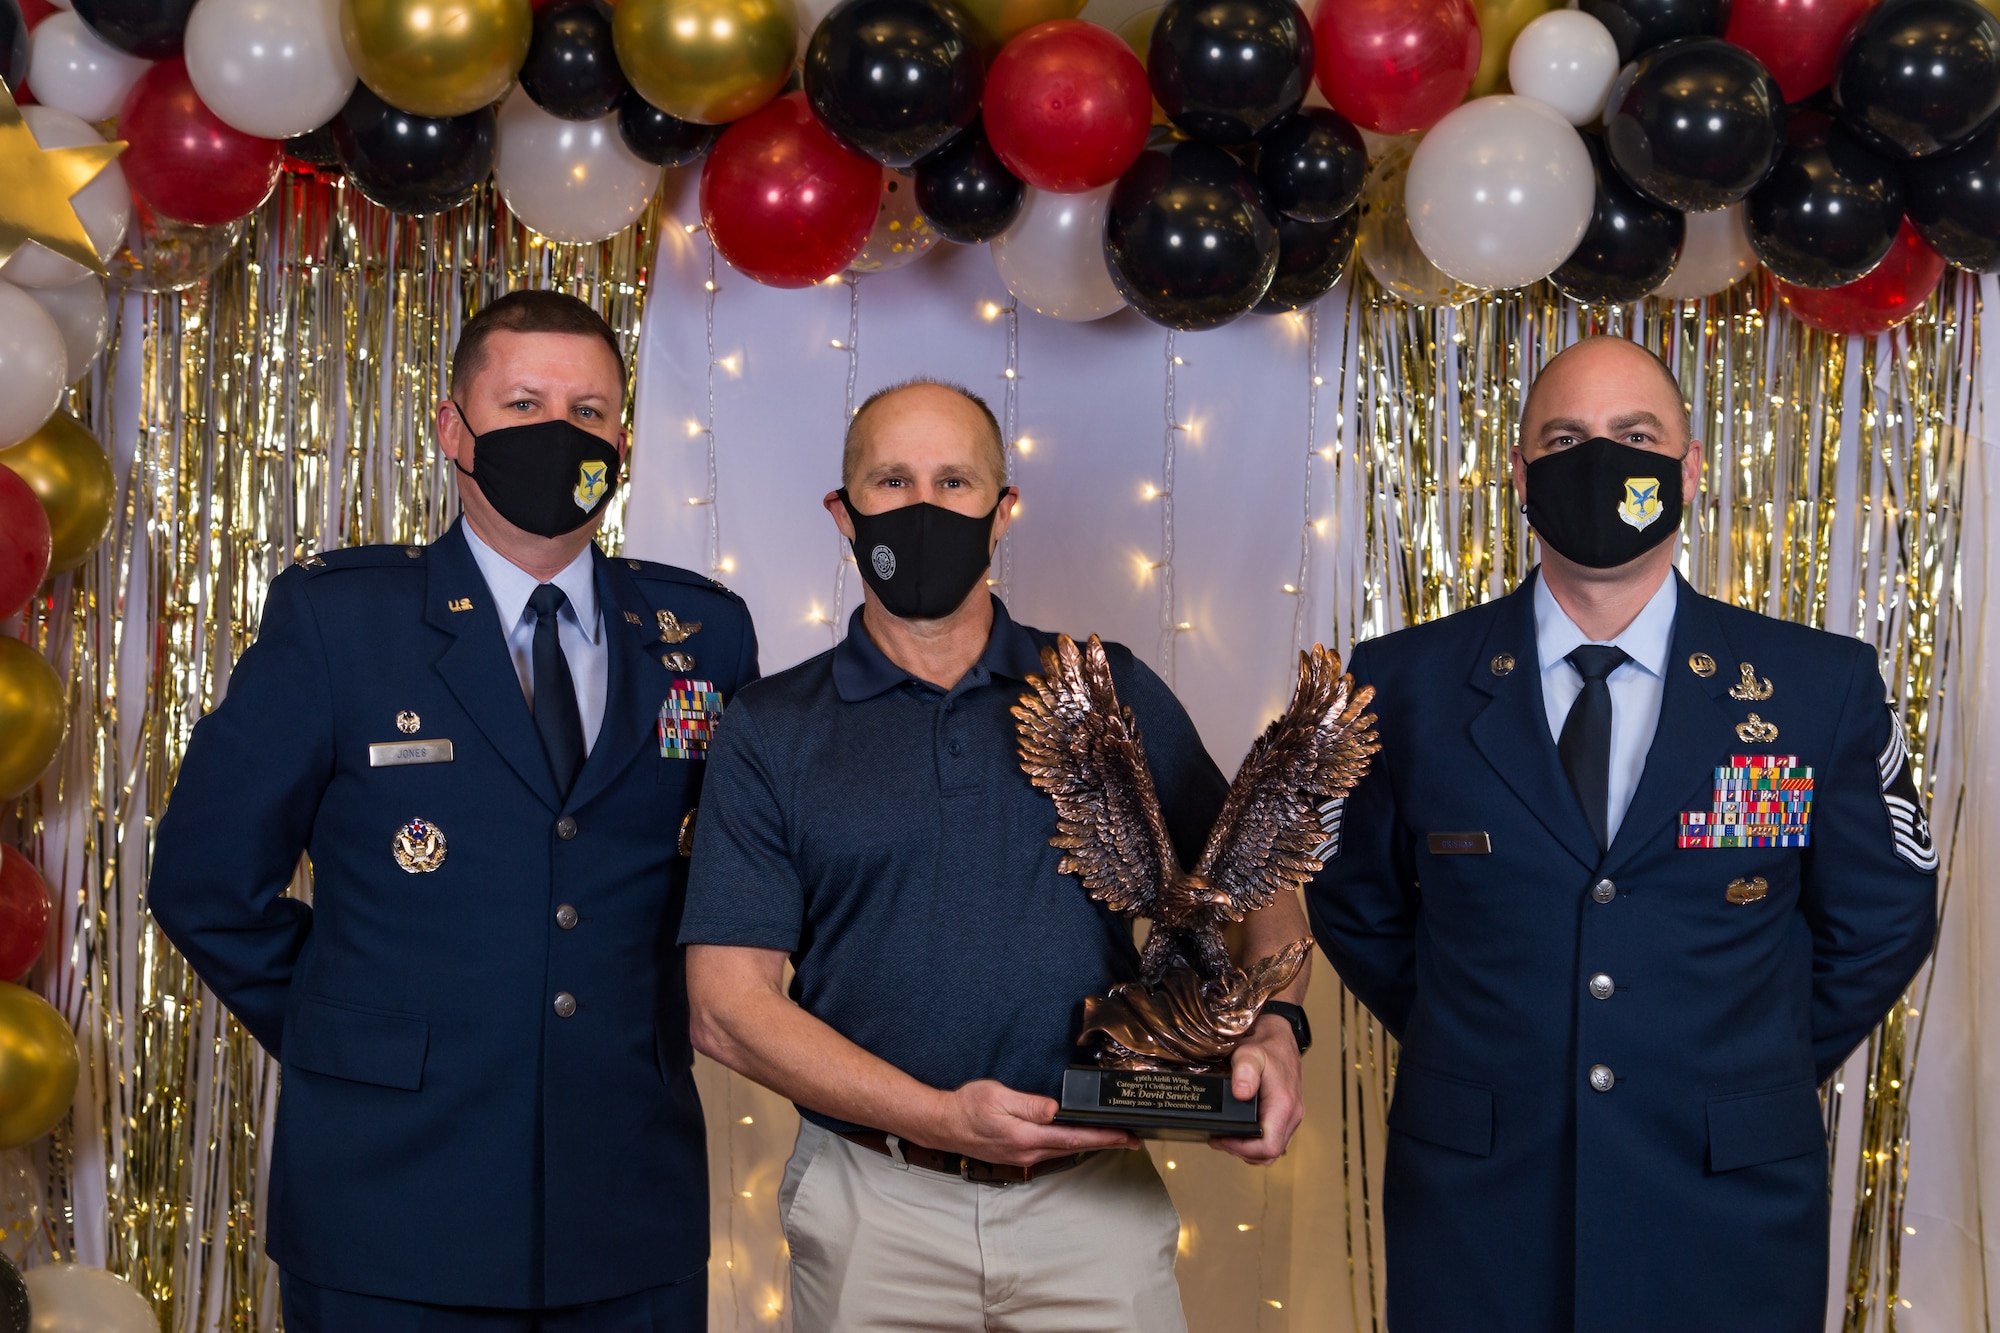 David Sawicki, 436th Operations Support Squadron, poses for a photo with Col. Matthew Jones, 436th Airlift Wing commander, and Chief Master Sgt. Jeremiah Grisham, 436th AW interim command chief, following the conclusion of the 436th AW 2020 Annual Awards Ceremony at Dover Air Force Base, Delaware, Jan. 28, 2021. Sawicki was named the wing's category I civilian of the year and received an eagle trophy. (U.S. Air Force photo by Roland Balik)